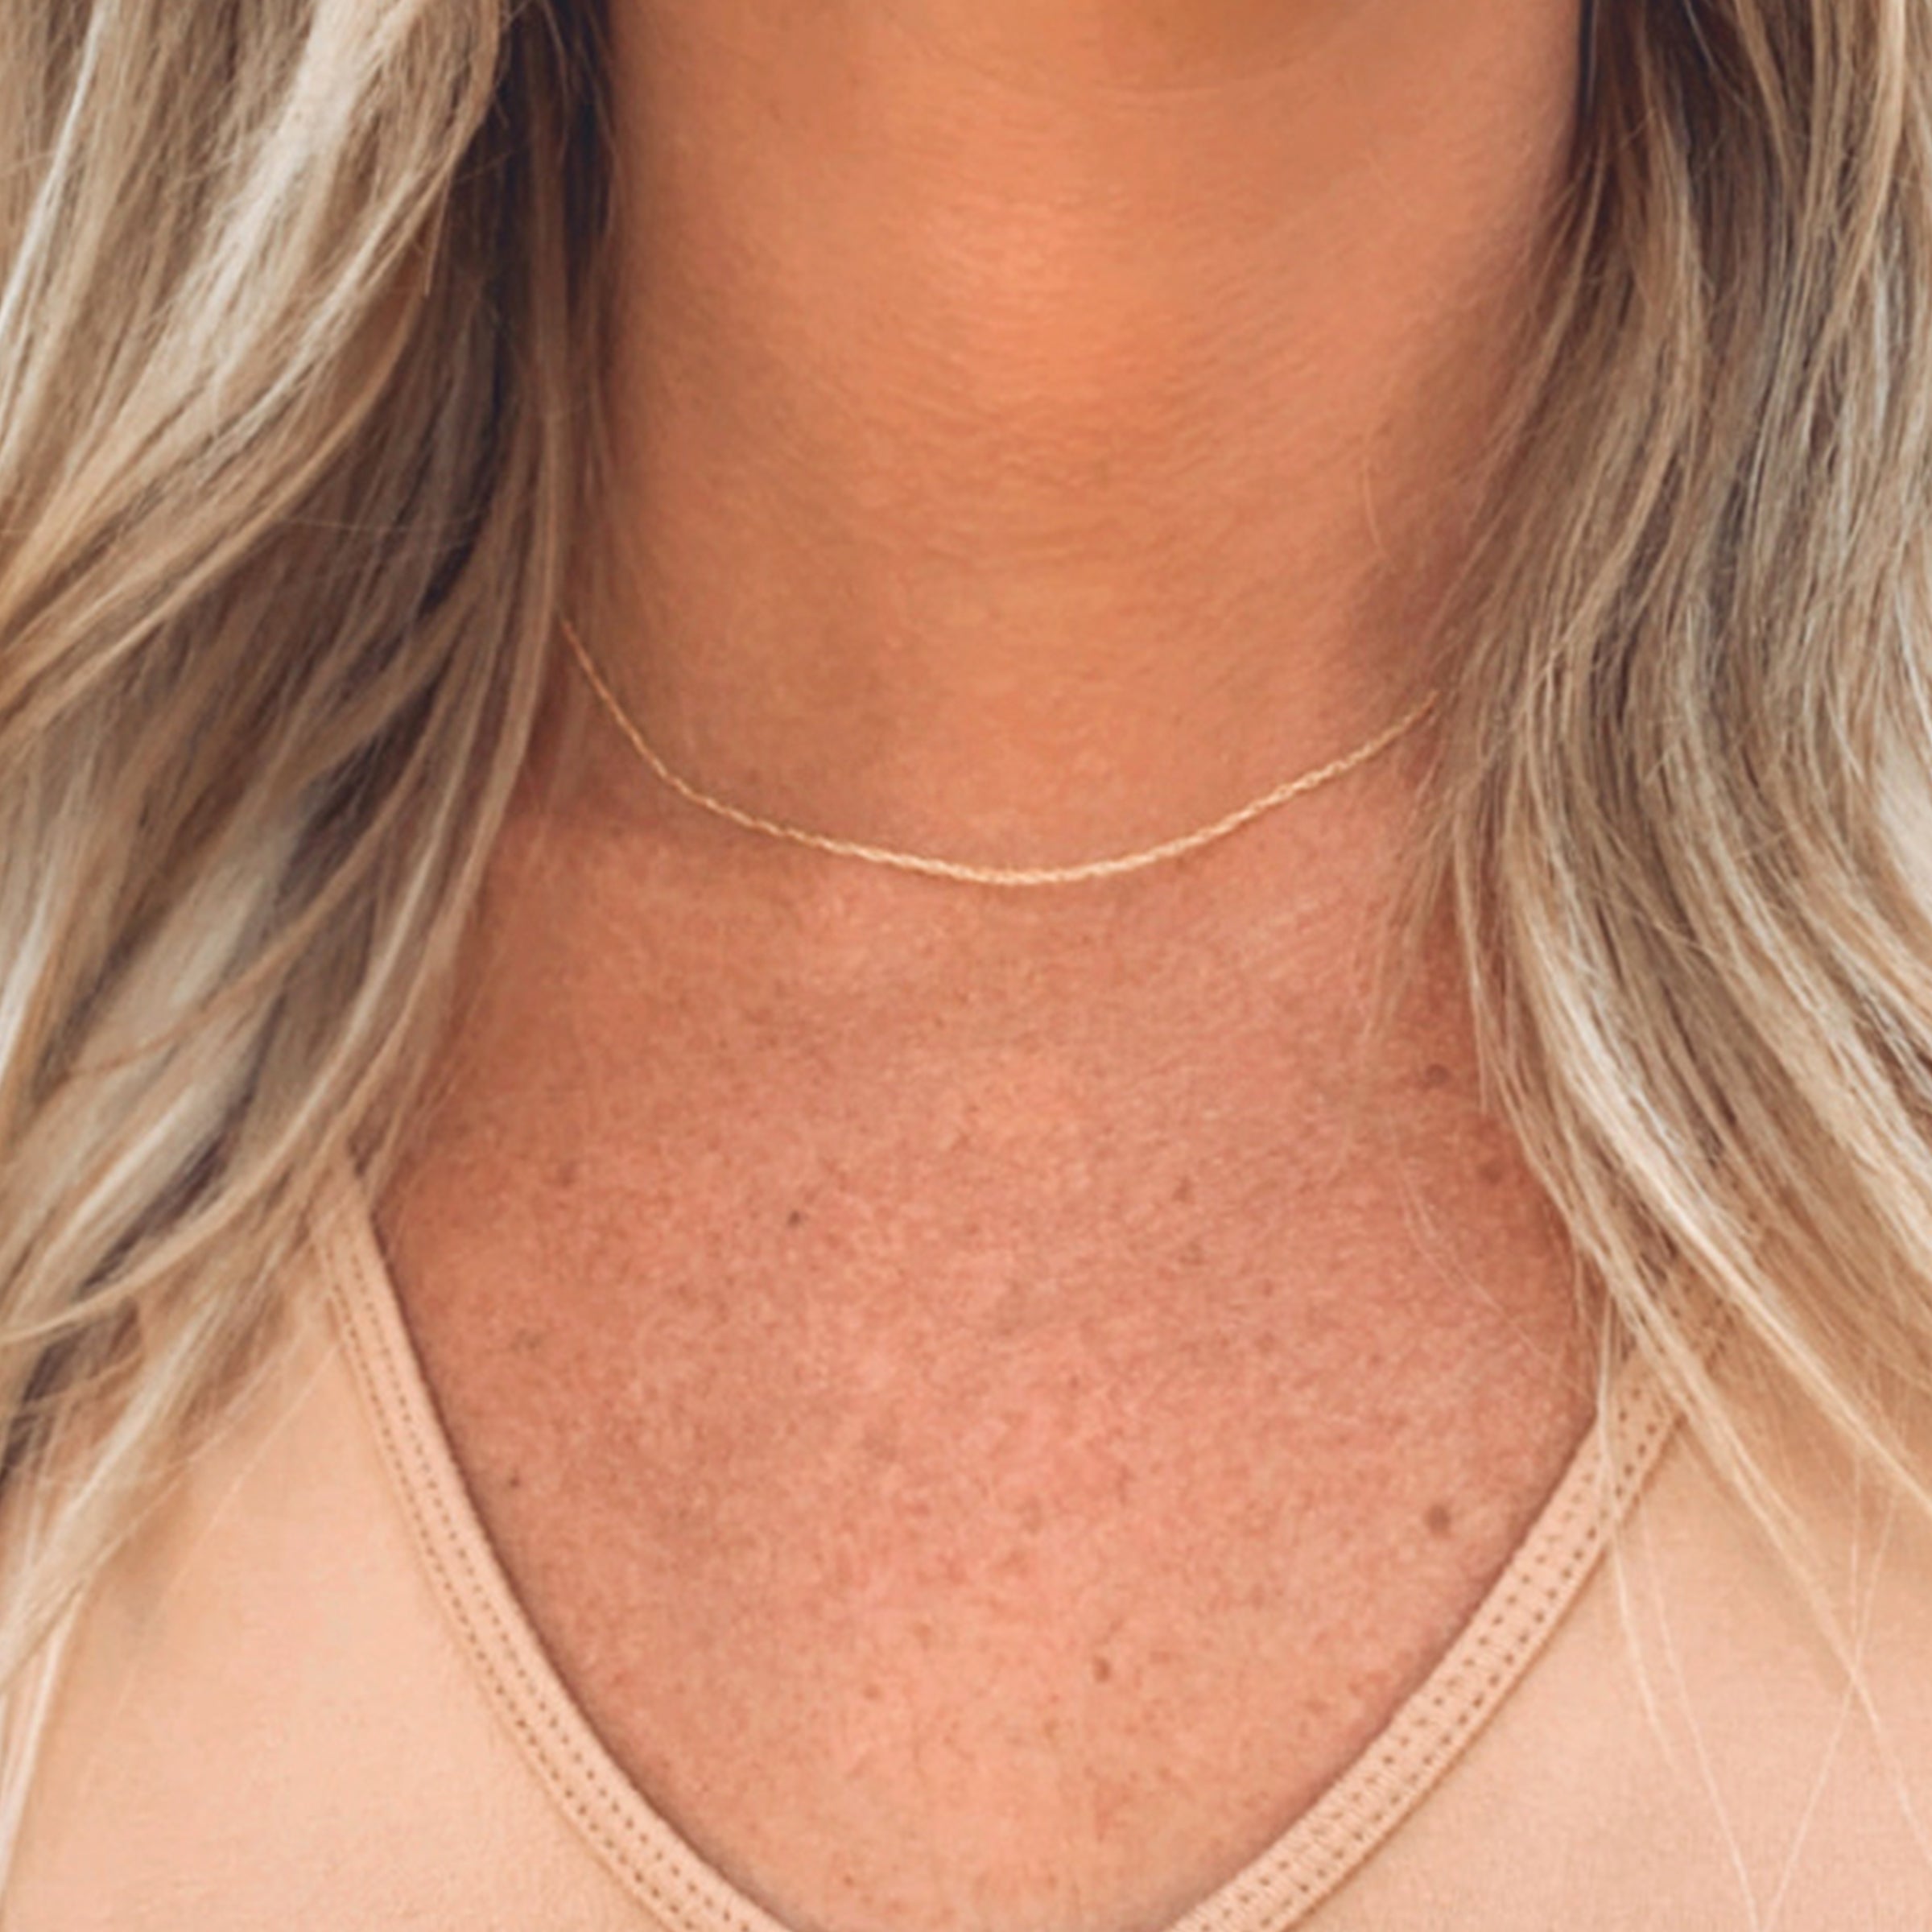 Women's Solid Gold Rope Chain | The Gold Goddess – The Gold Gods